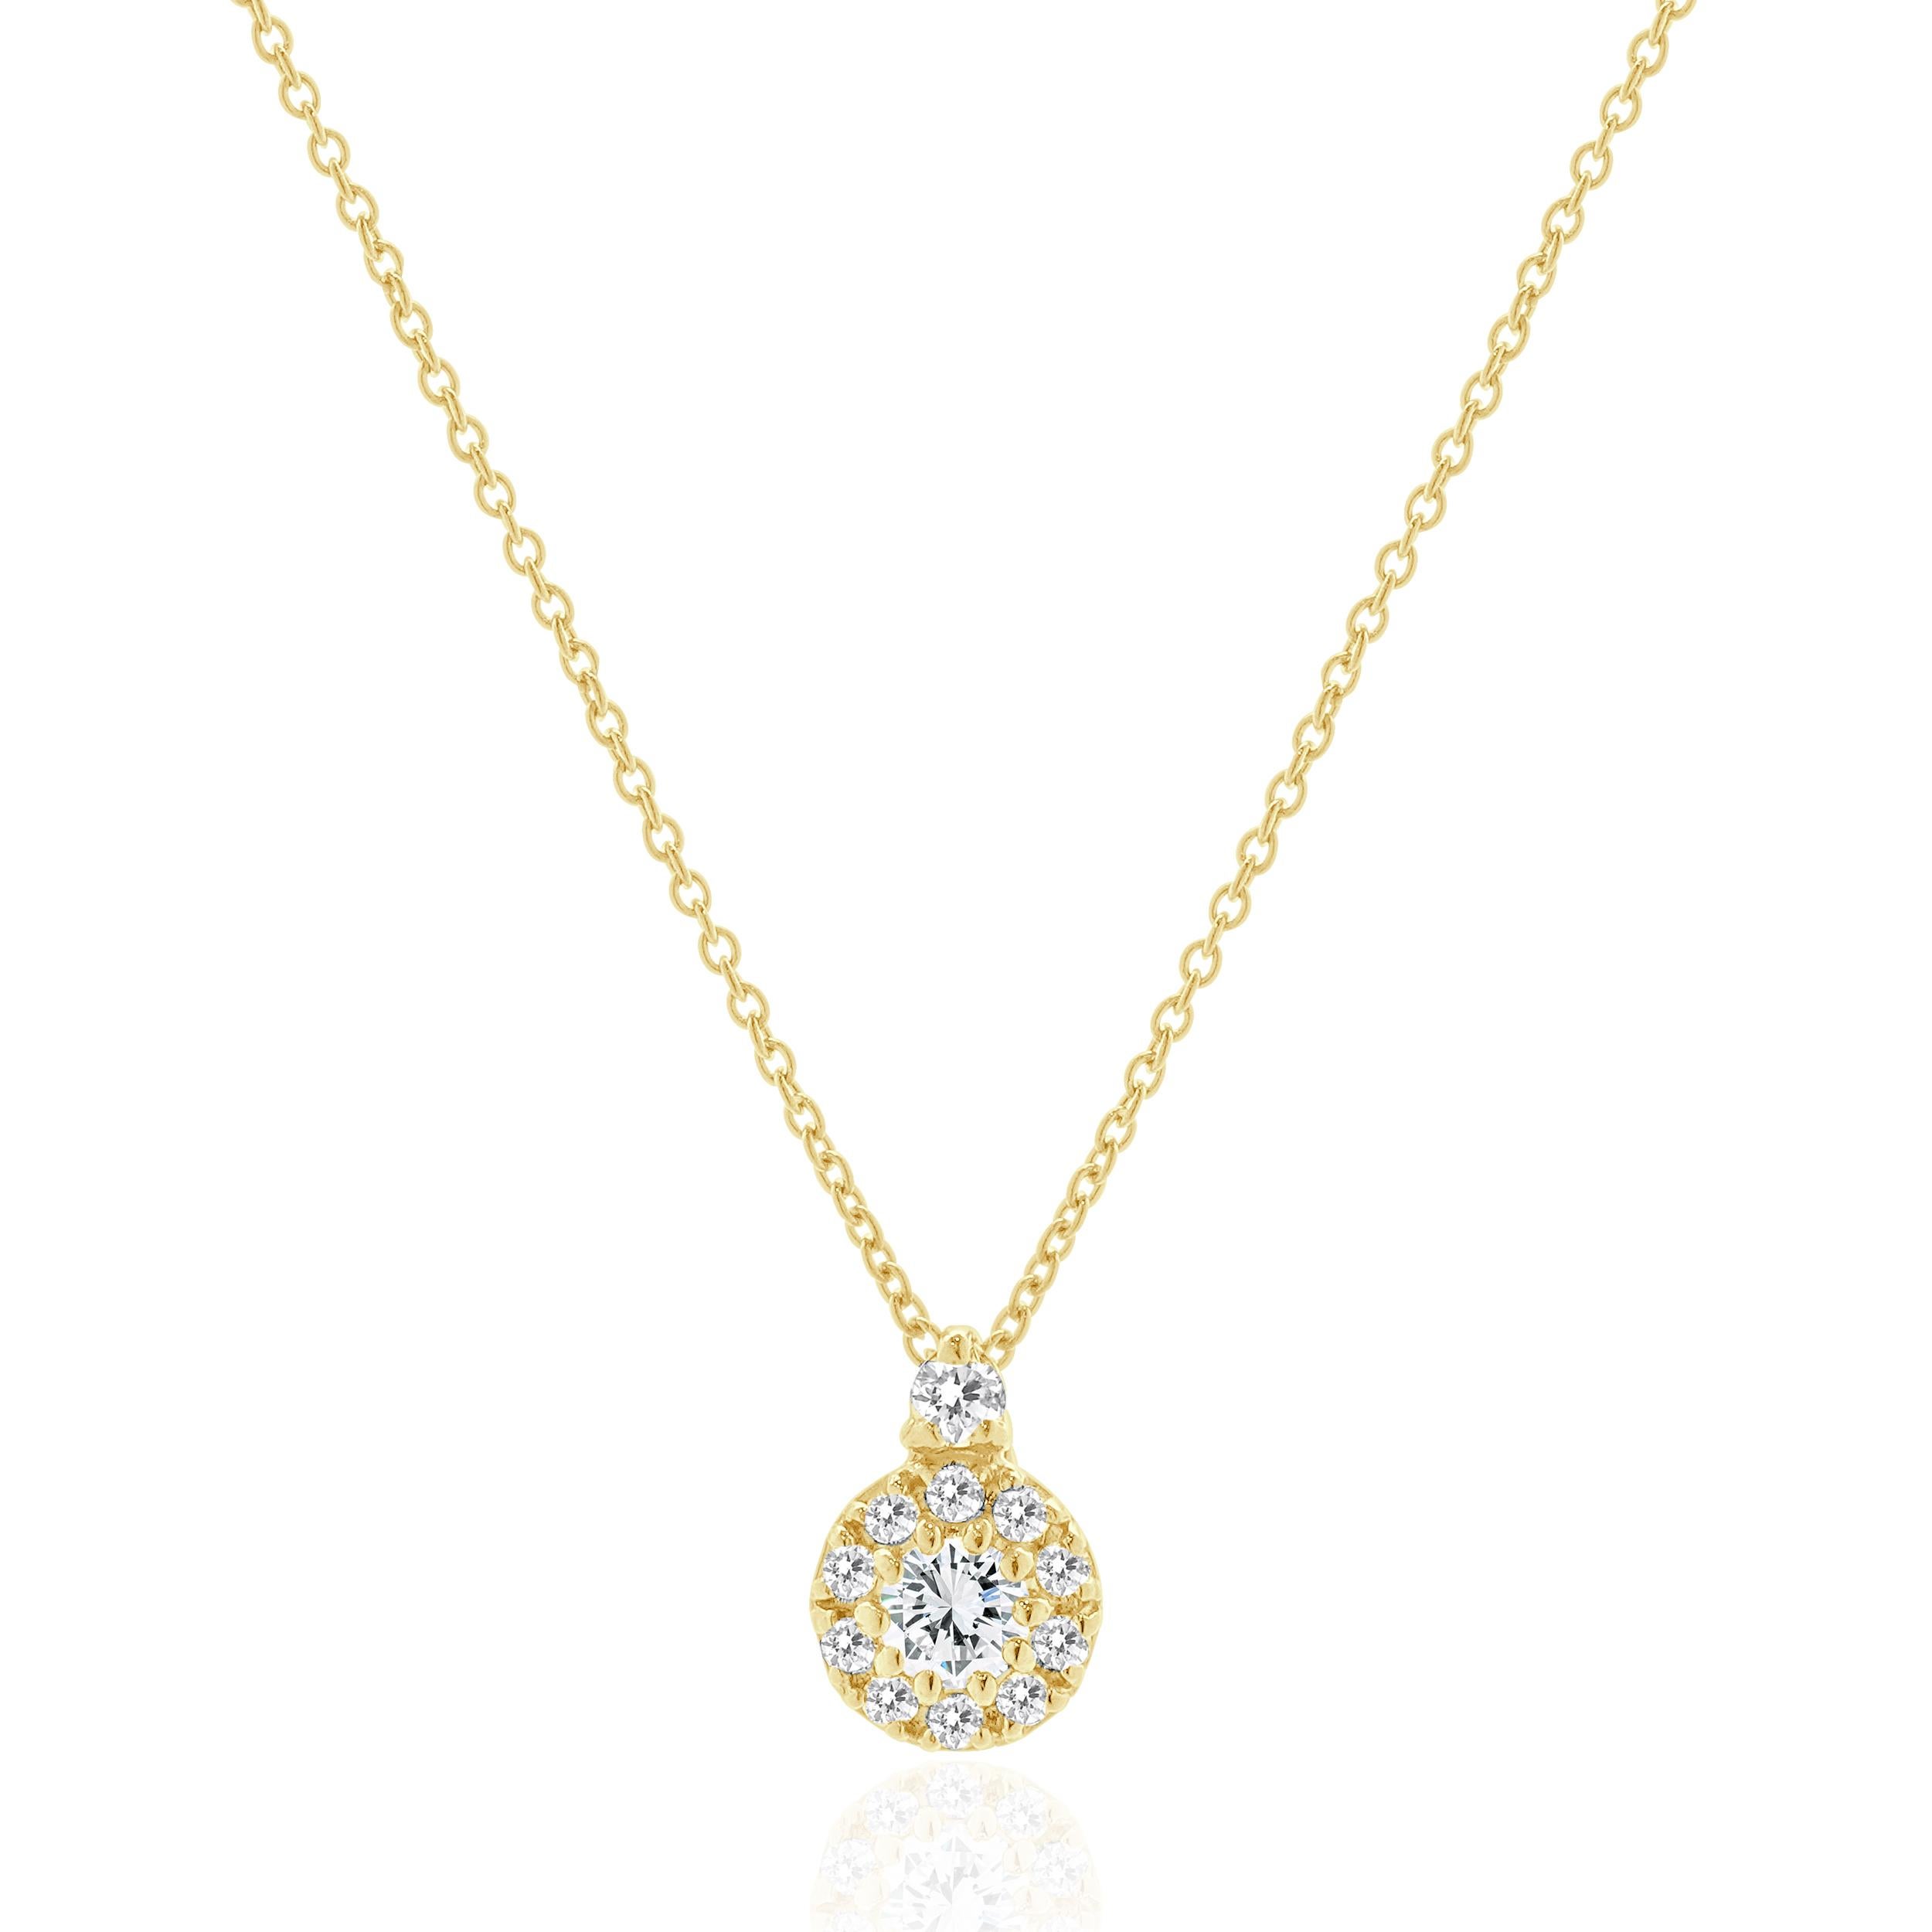 Designer: Roberto Coin
Material: 18K yellow gold
Diamonds: 12 round brilliant cut = 0.30cttw
Color: G
Clarity: VS1
Weight: 2.64
Dimensions: necklace measures 18-inches long
